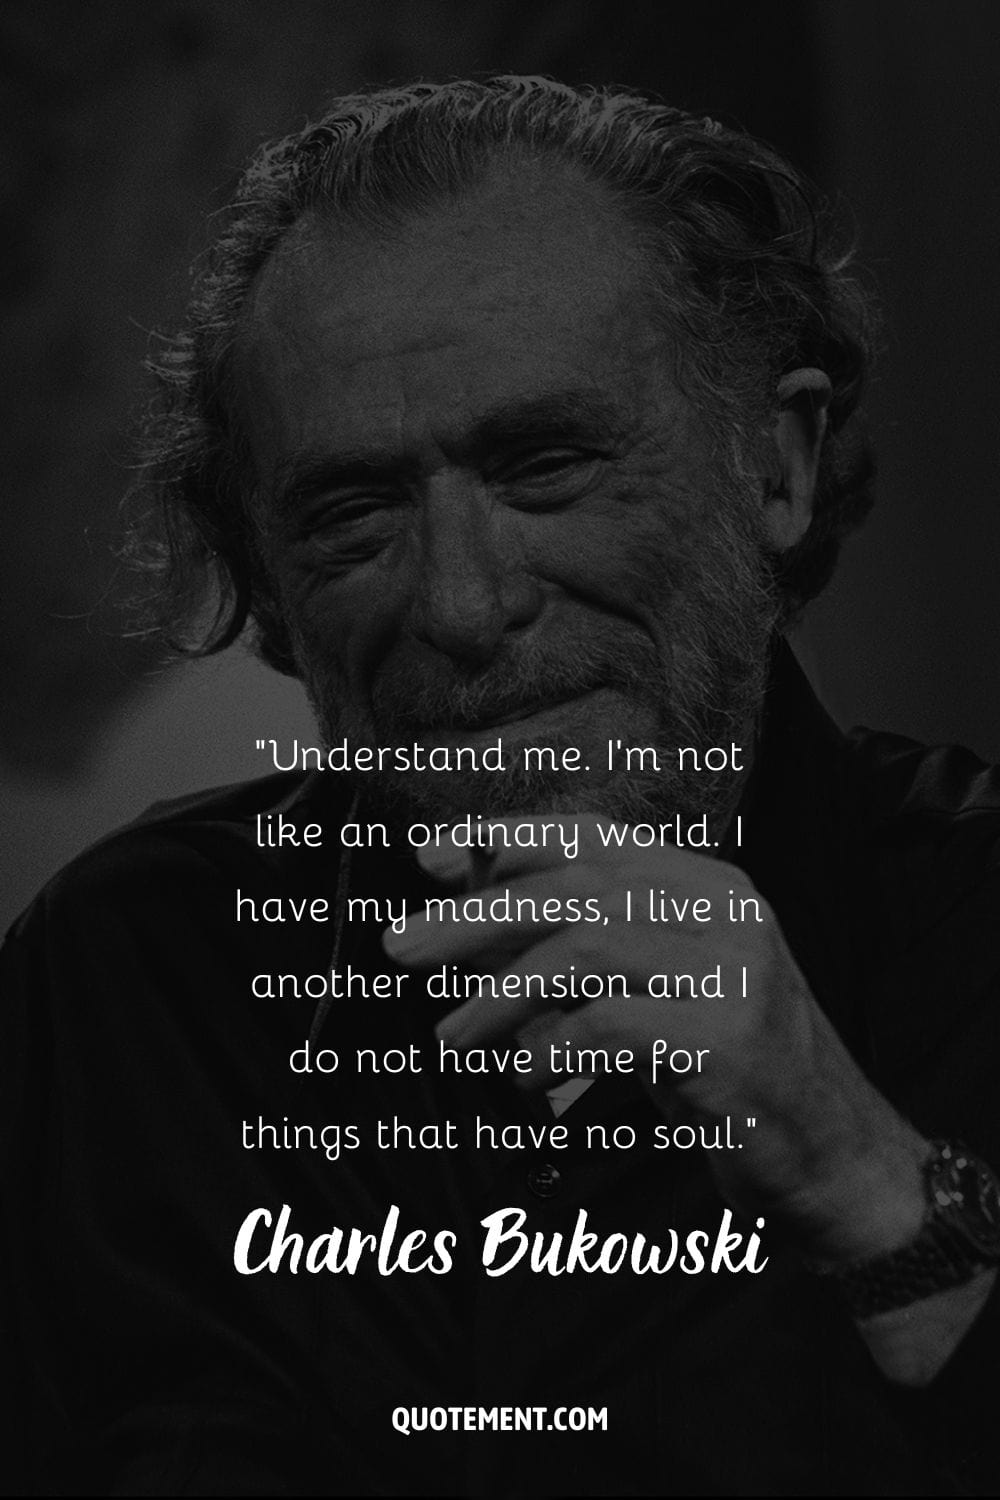 smiling Bukowski with a cigarette representing the greatest Charles Bukowski quote